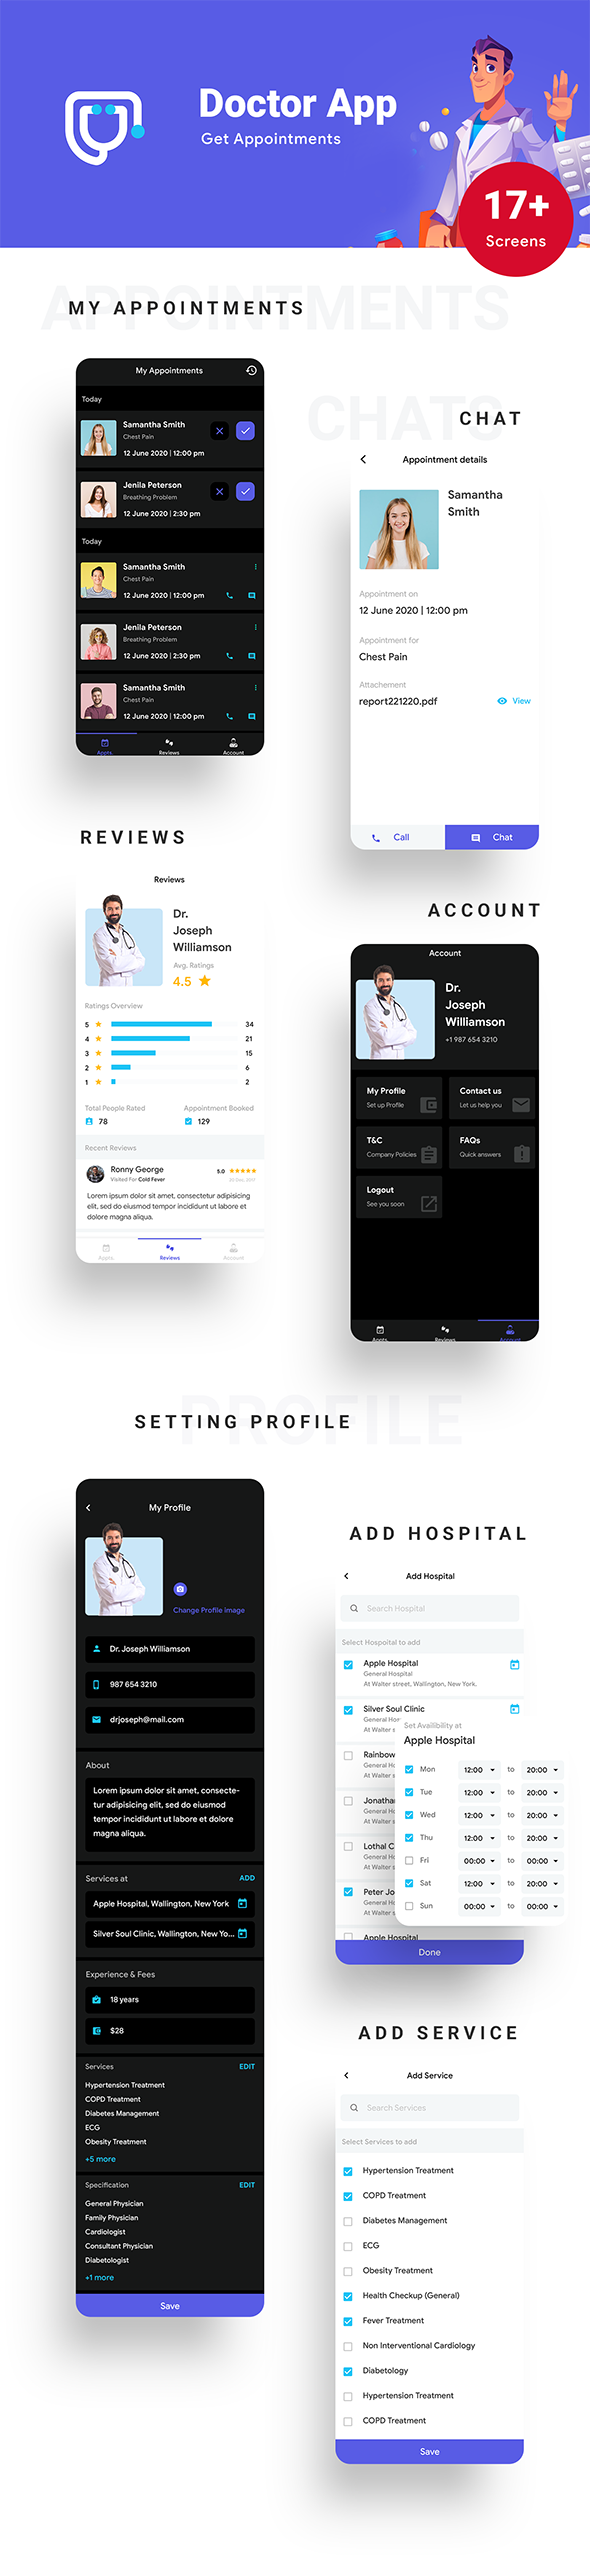 17 Template| Doctor Appointment Booking| Hospital management POS system| Medicine Delivery| Doctopro - 8